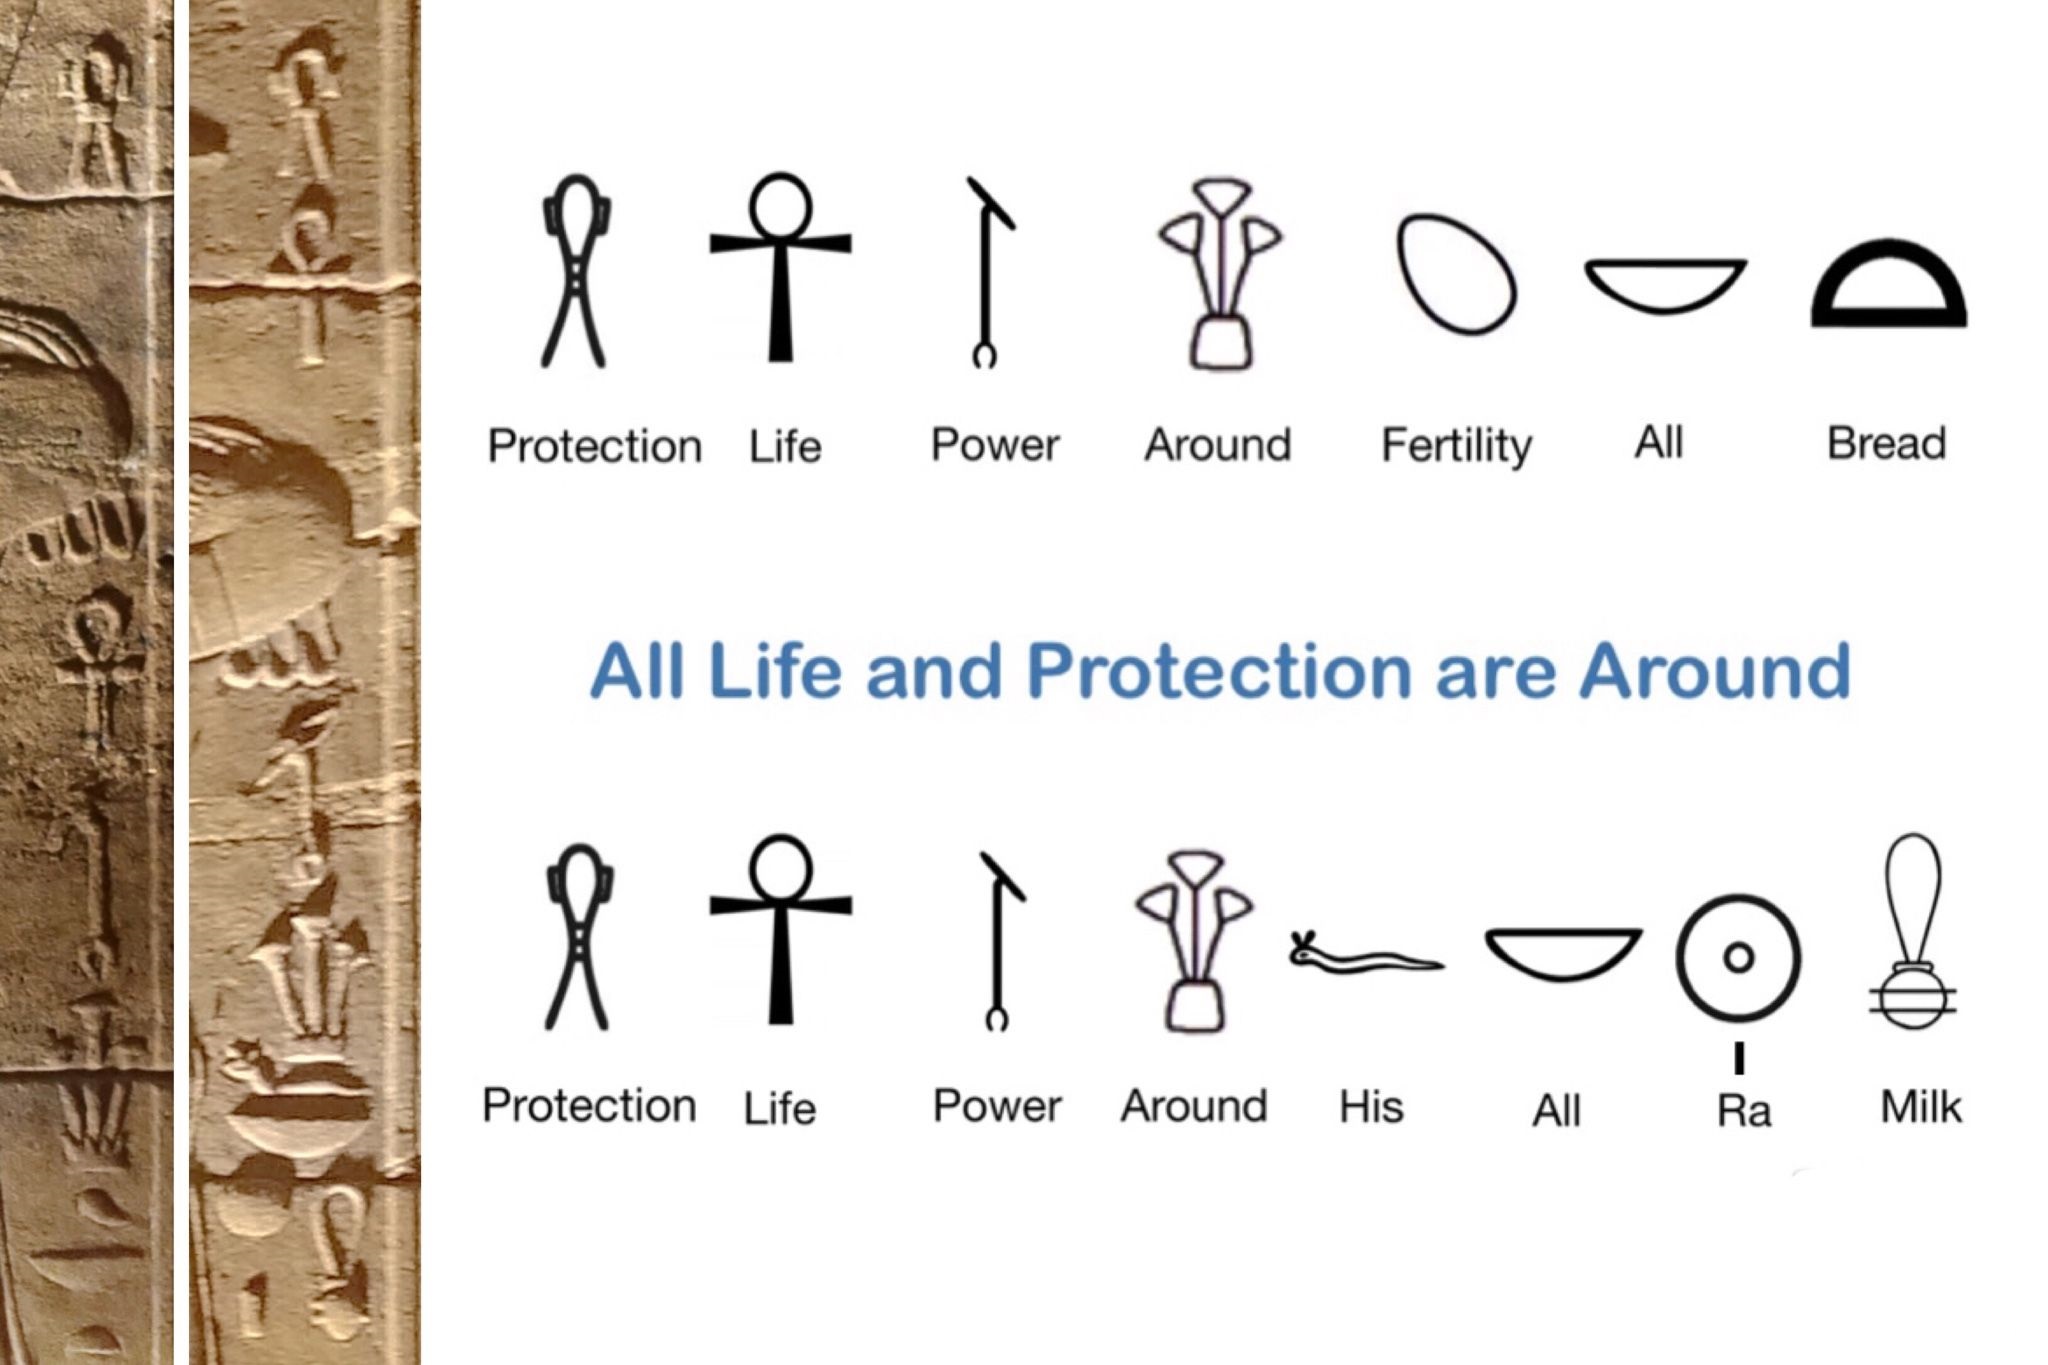 The Ancient Egyptian Symbol Of Life The Ankh S Meaning And Significance